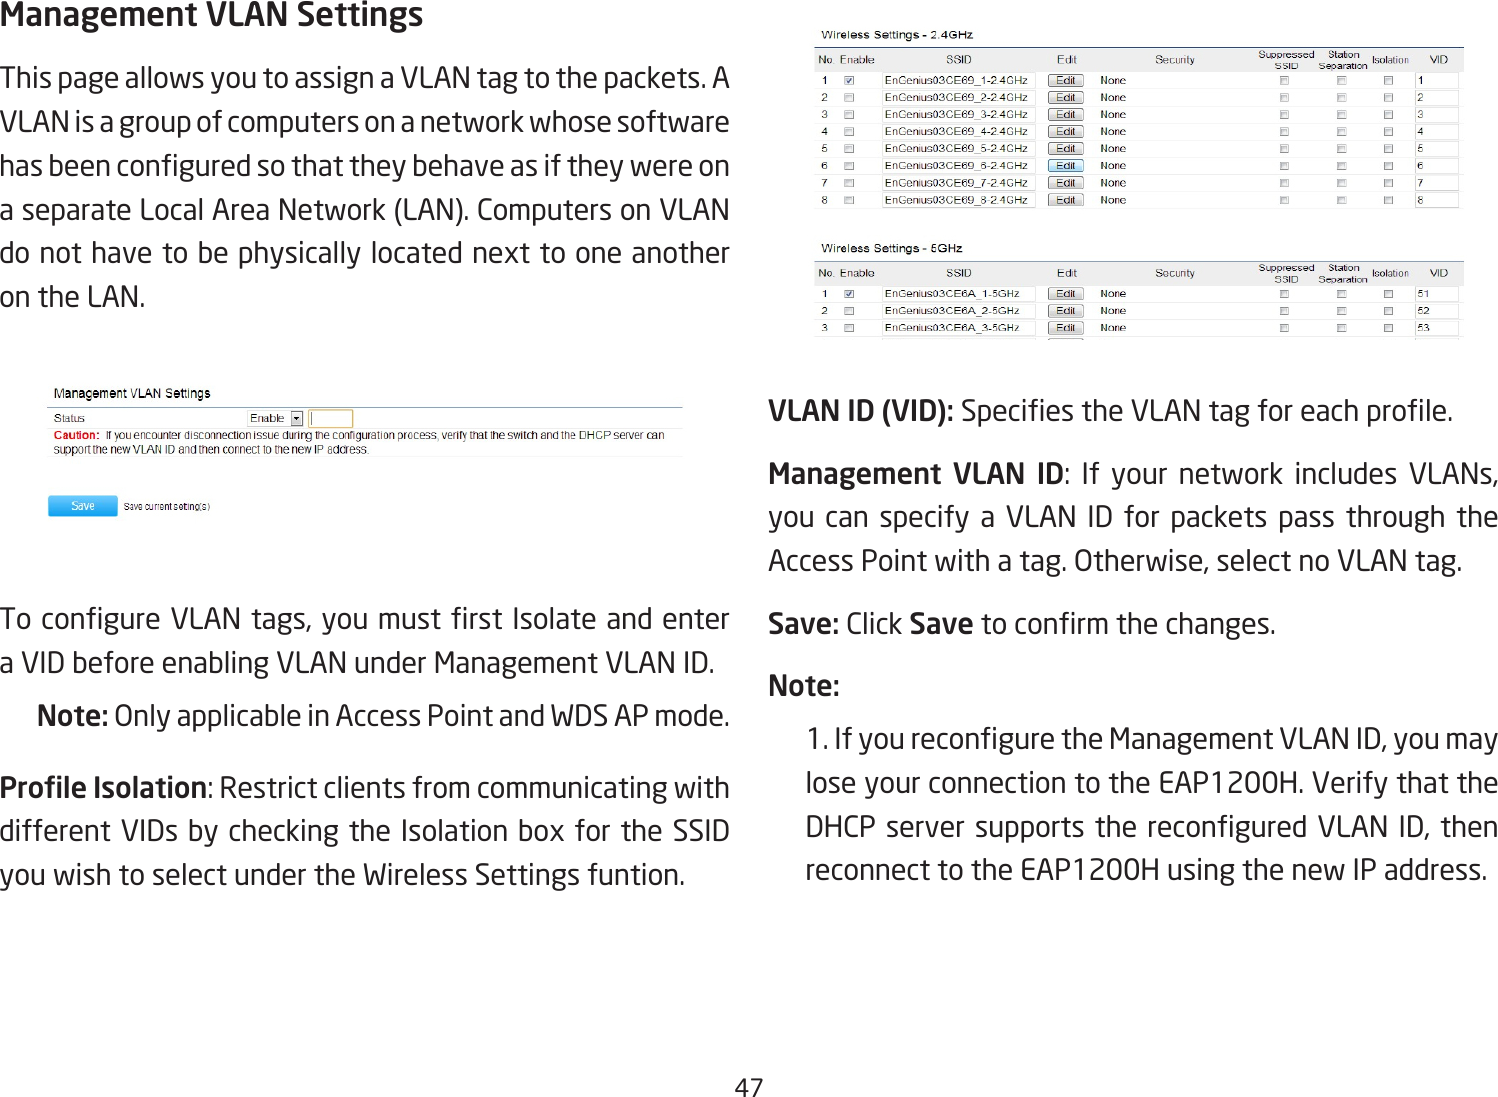 47Management VLAN SettingsThis page allows you to assign a VLAN tag to the packets. A VLAN is a group of computers on a network whose software hasbeenconguredsothattheybehaveasiftheywereona separate Local Area Network (LAN). Computers on VLAN donothavetobephysicallylocatednexttooneanotheron the LAN.TocongureVLANtags,youmustrstIsolateandentera VID before enabling VLAN under Management VLAN ID.Note: Only applicable in Access Point and WDS AP mode.Prole Isolation:RestrictclientsfromcommunicatingwithdifferentVIDsbycheckingtheIsolationboxfortheSSIDyou wish to select under the Wireless Settings funtion.VLAN ID (VID): SpeciestheVLANtagforeachprole.Management  VLAN  ID: If your network includes VLANs,you can specify a VLAN ID for packets pass through the AccessPointwithatag.Otherwise,selectnoVLANtag.Save: Click Savetoconrmthechanges.Note: 1.IfyoureconguretheManagementVLANID,youmaylose your connection to the EAP1200H. Verify that the DHCPserversupportsthereconguredVLANID,thenreconnect to the EAP1200H using the new IP address. 